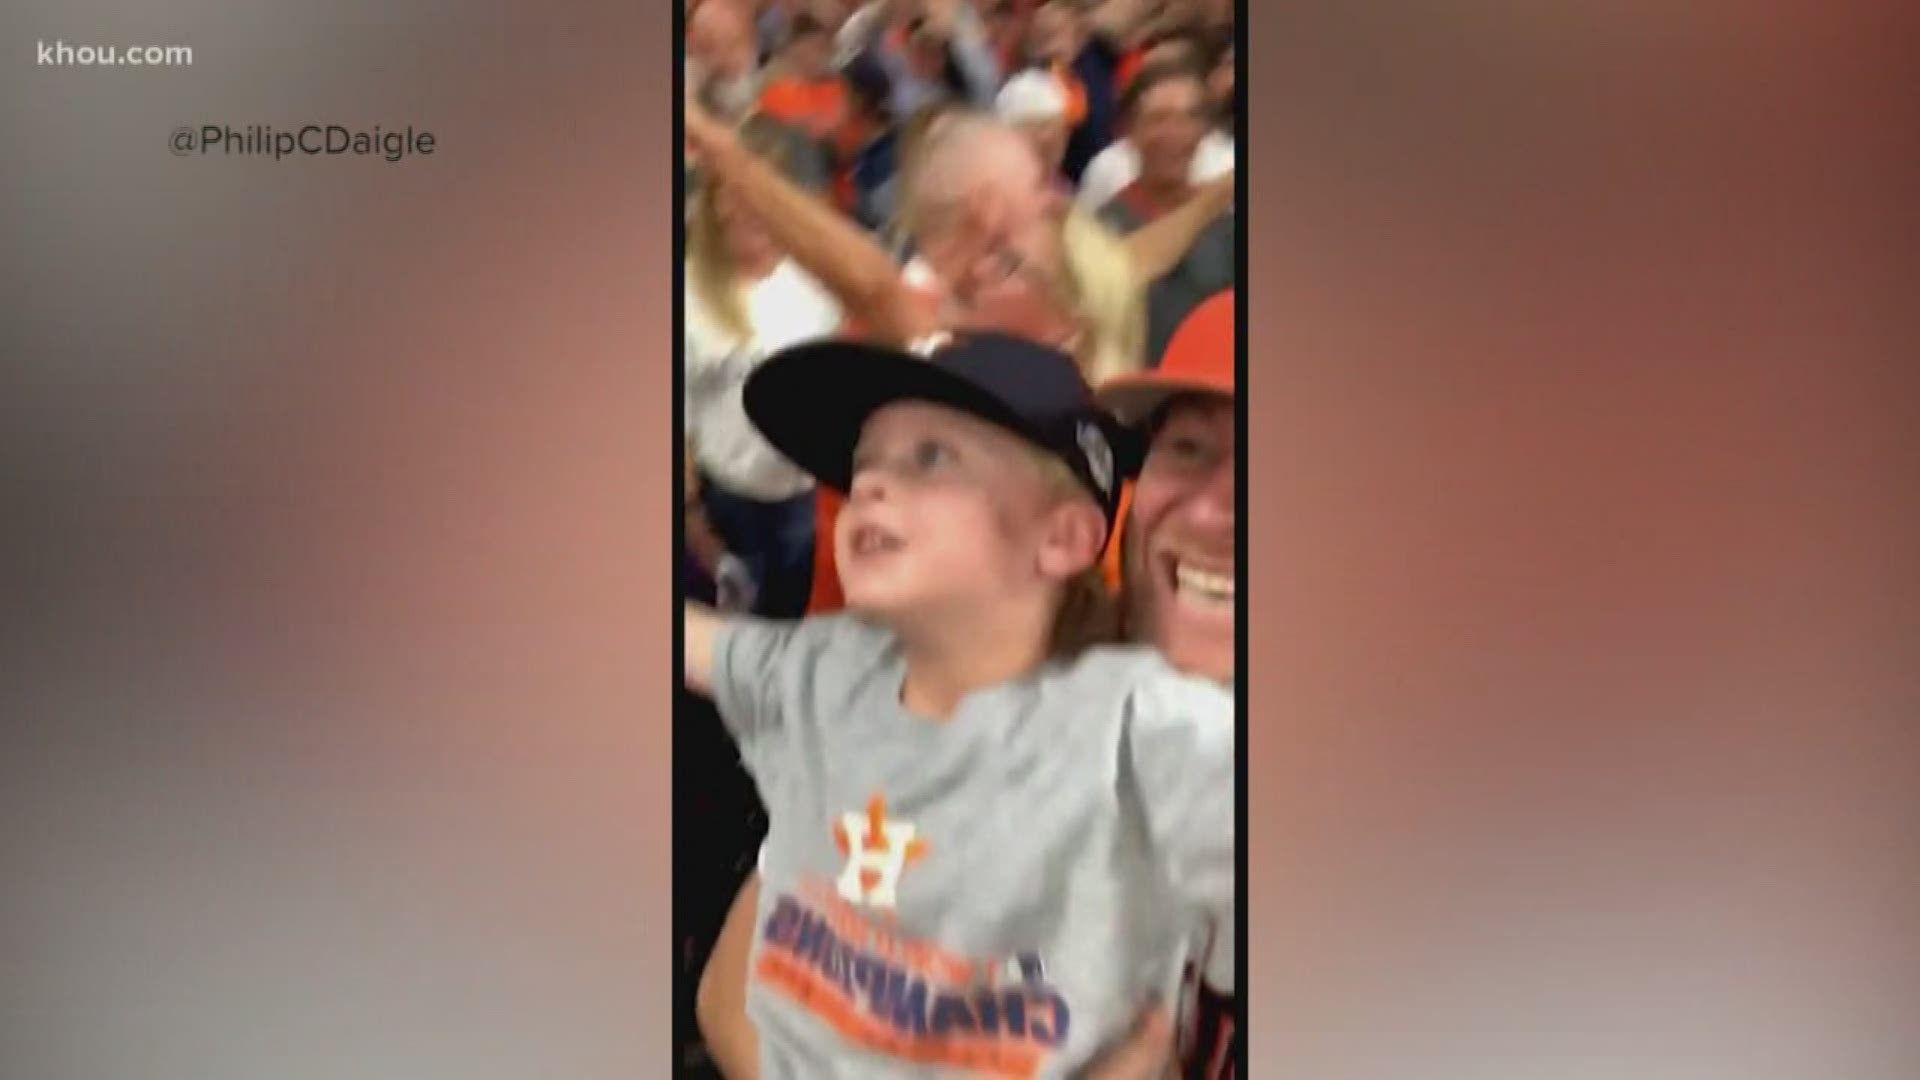 Watch clips of Astros fans celebrating after Jose Altuve won Game 6 in the ALCS with a walk-off home run.